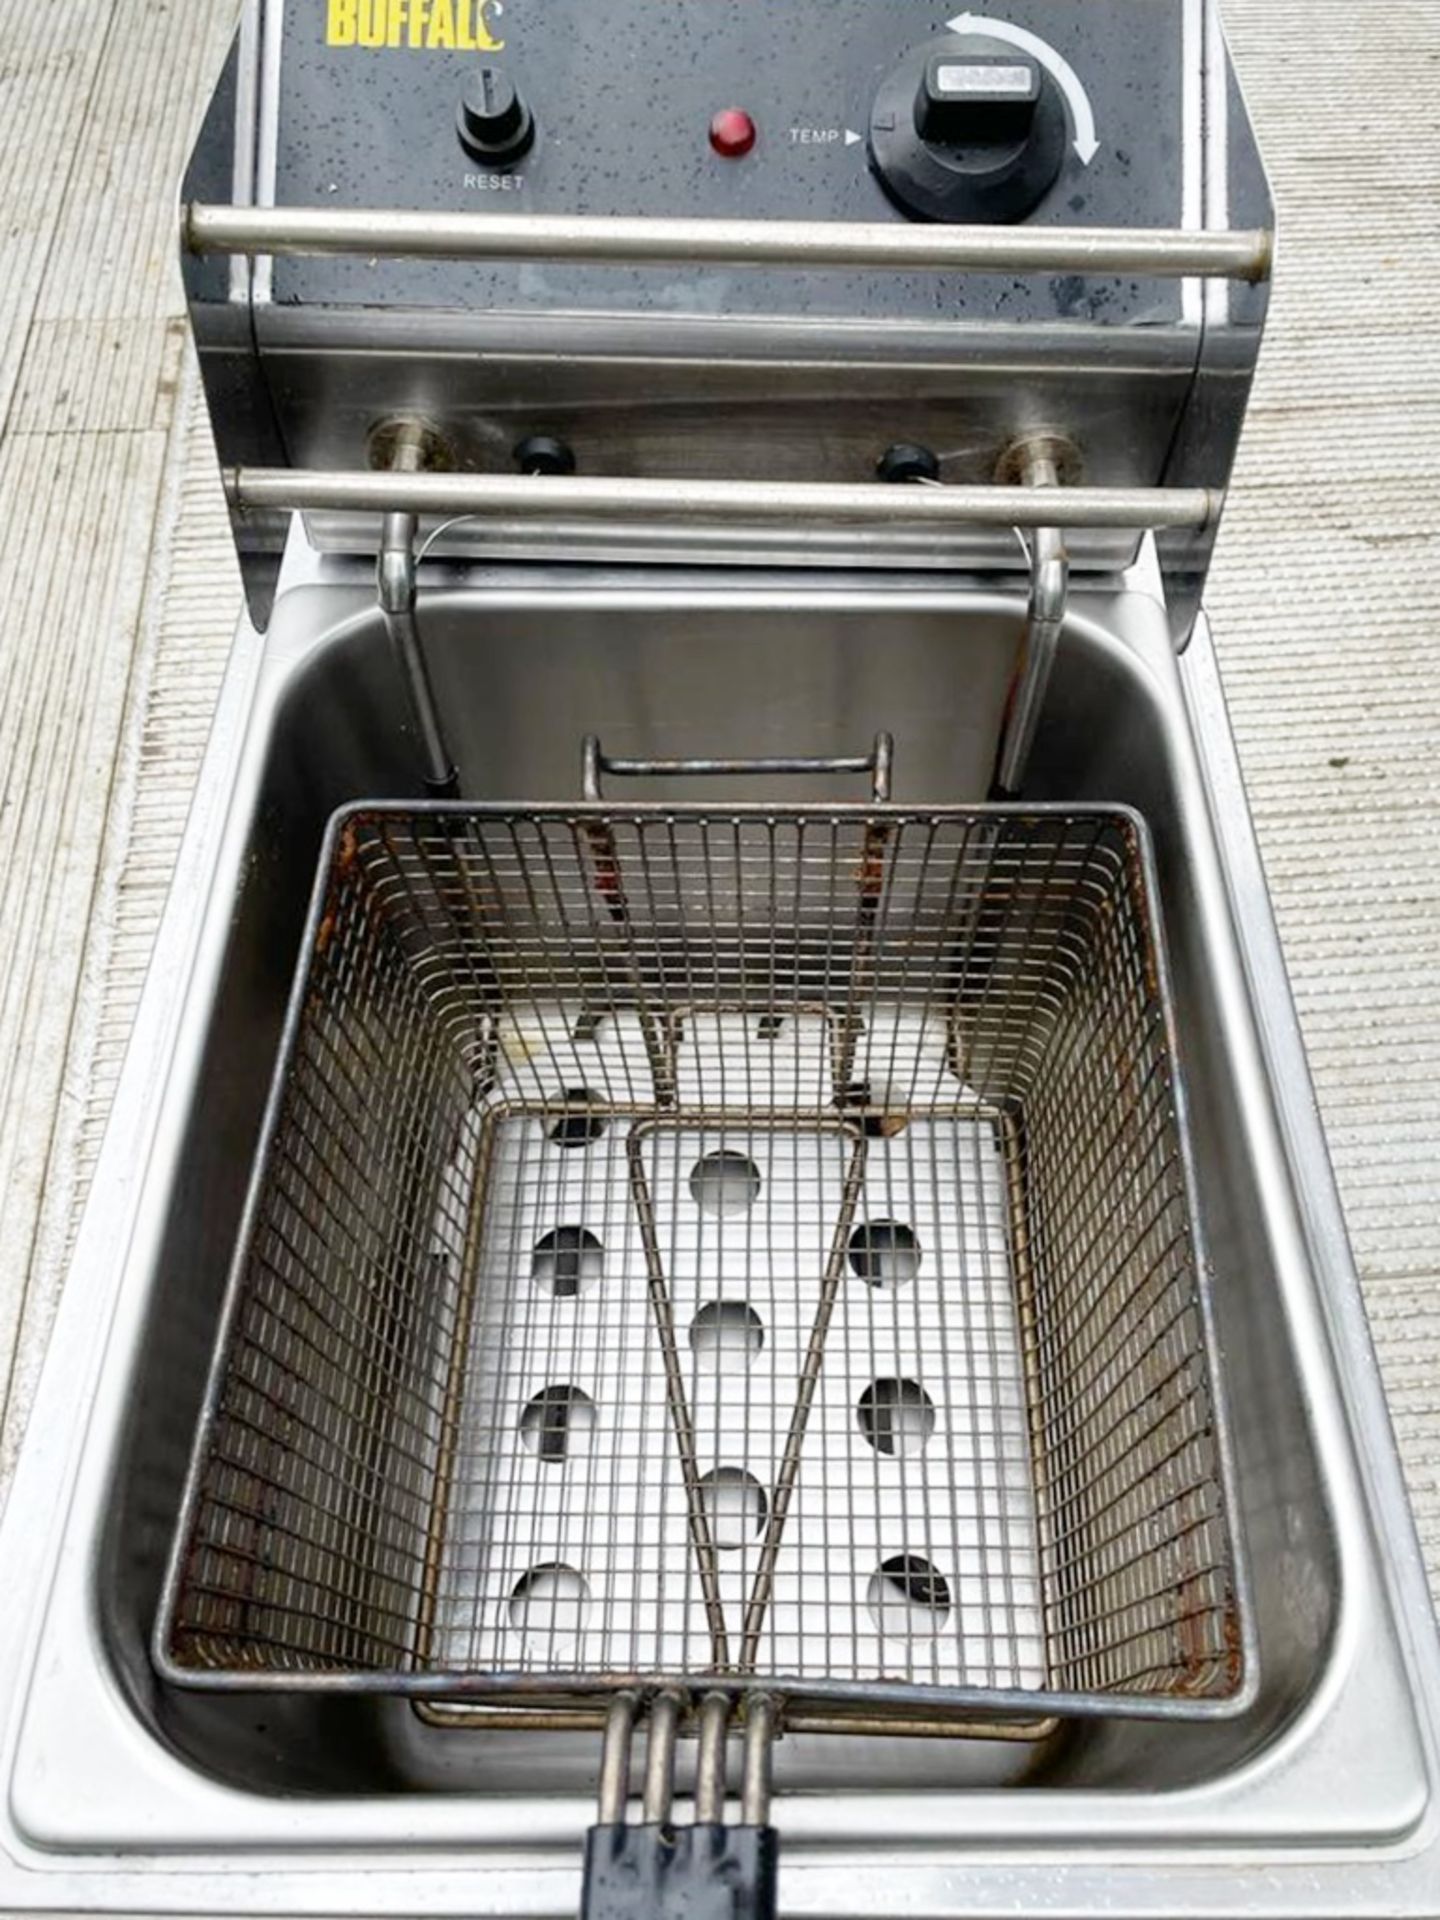 1 x Buffalo Countertop Single Basket Fryer With Single Basket and Stainless Steel Finish - 240v - - Image 2 of 2